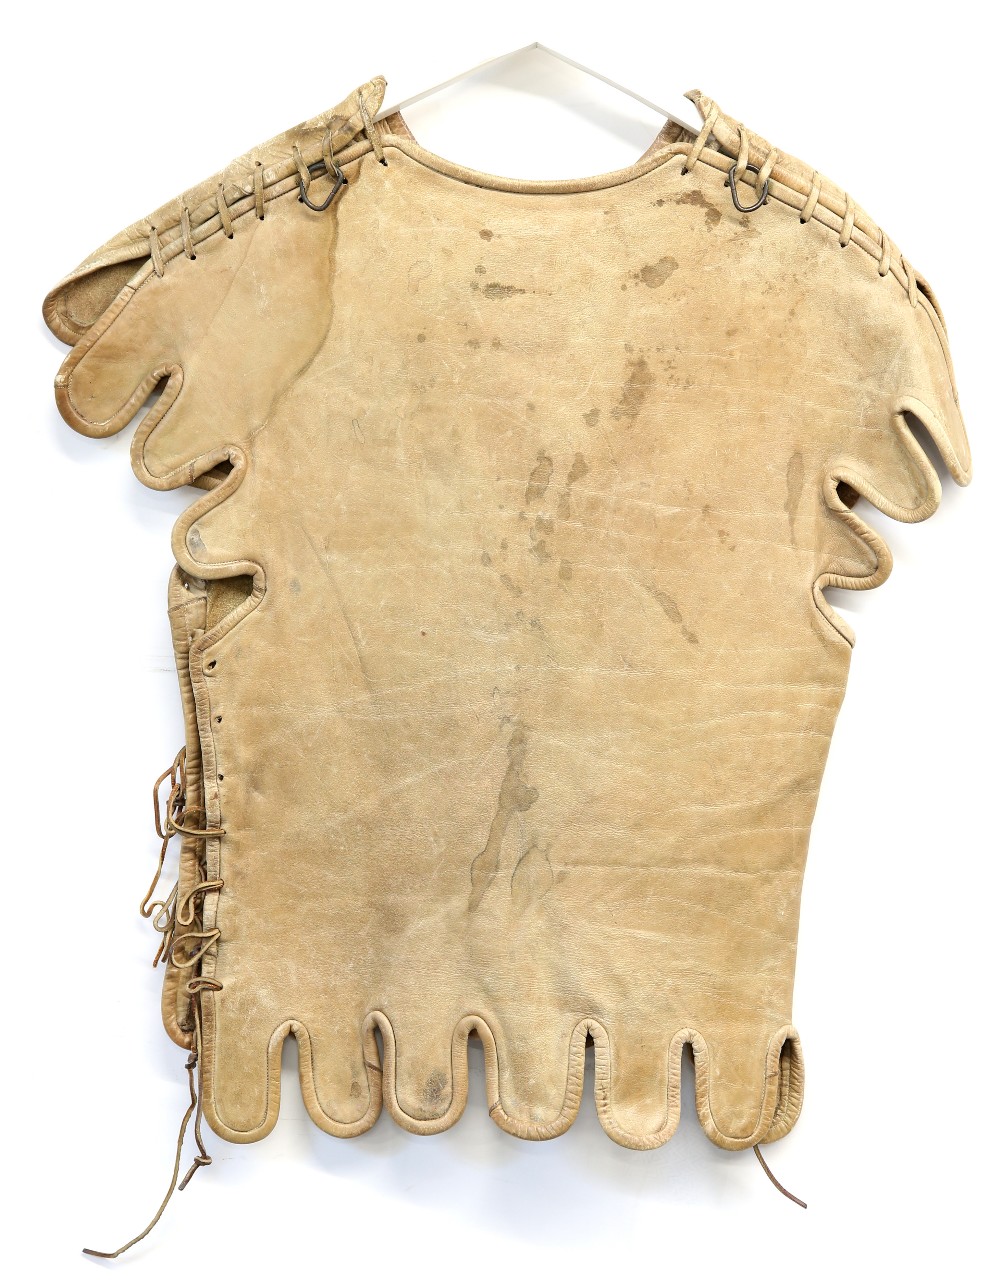 Leather Roman Cavalry tunic used in productions such as Cleopatra and Carry on Cleo. Western Costume - Image 4 of 4